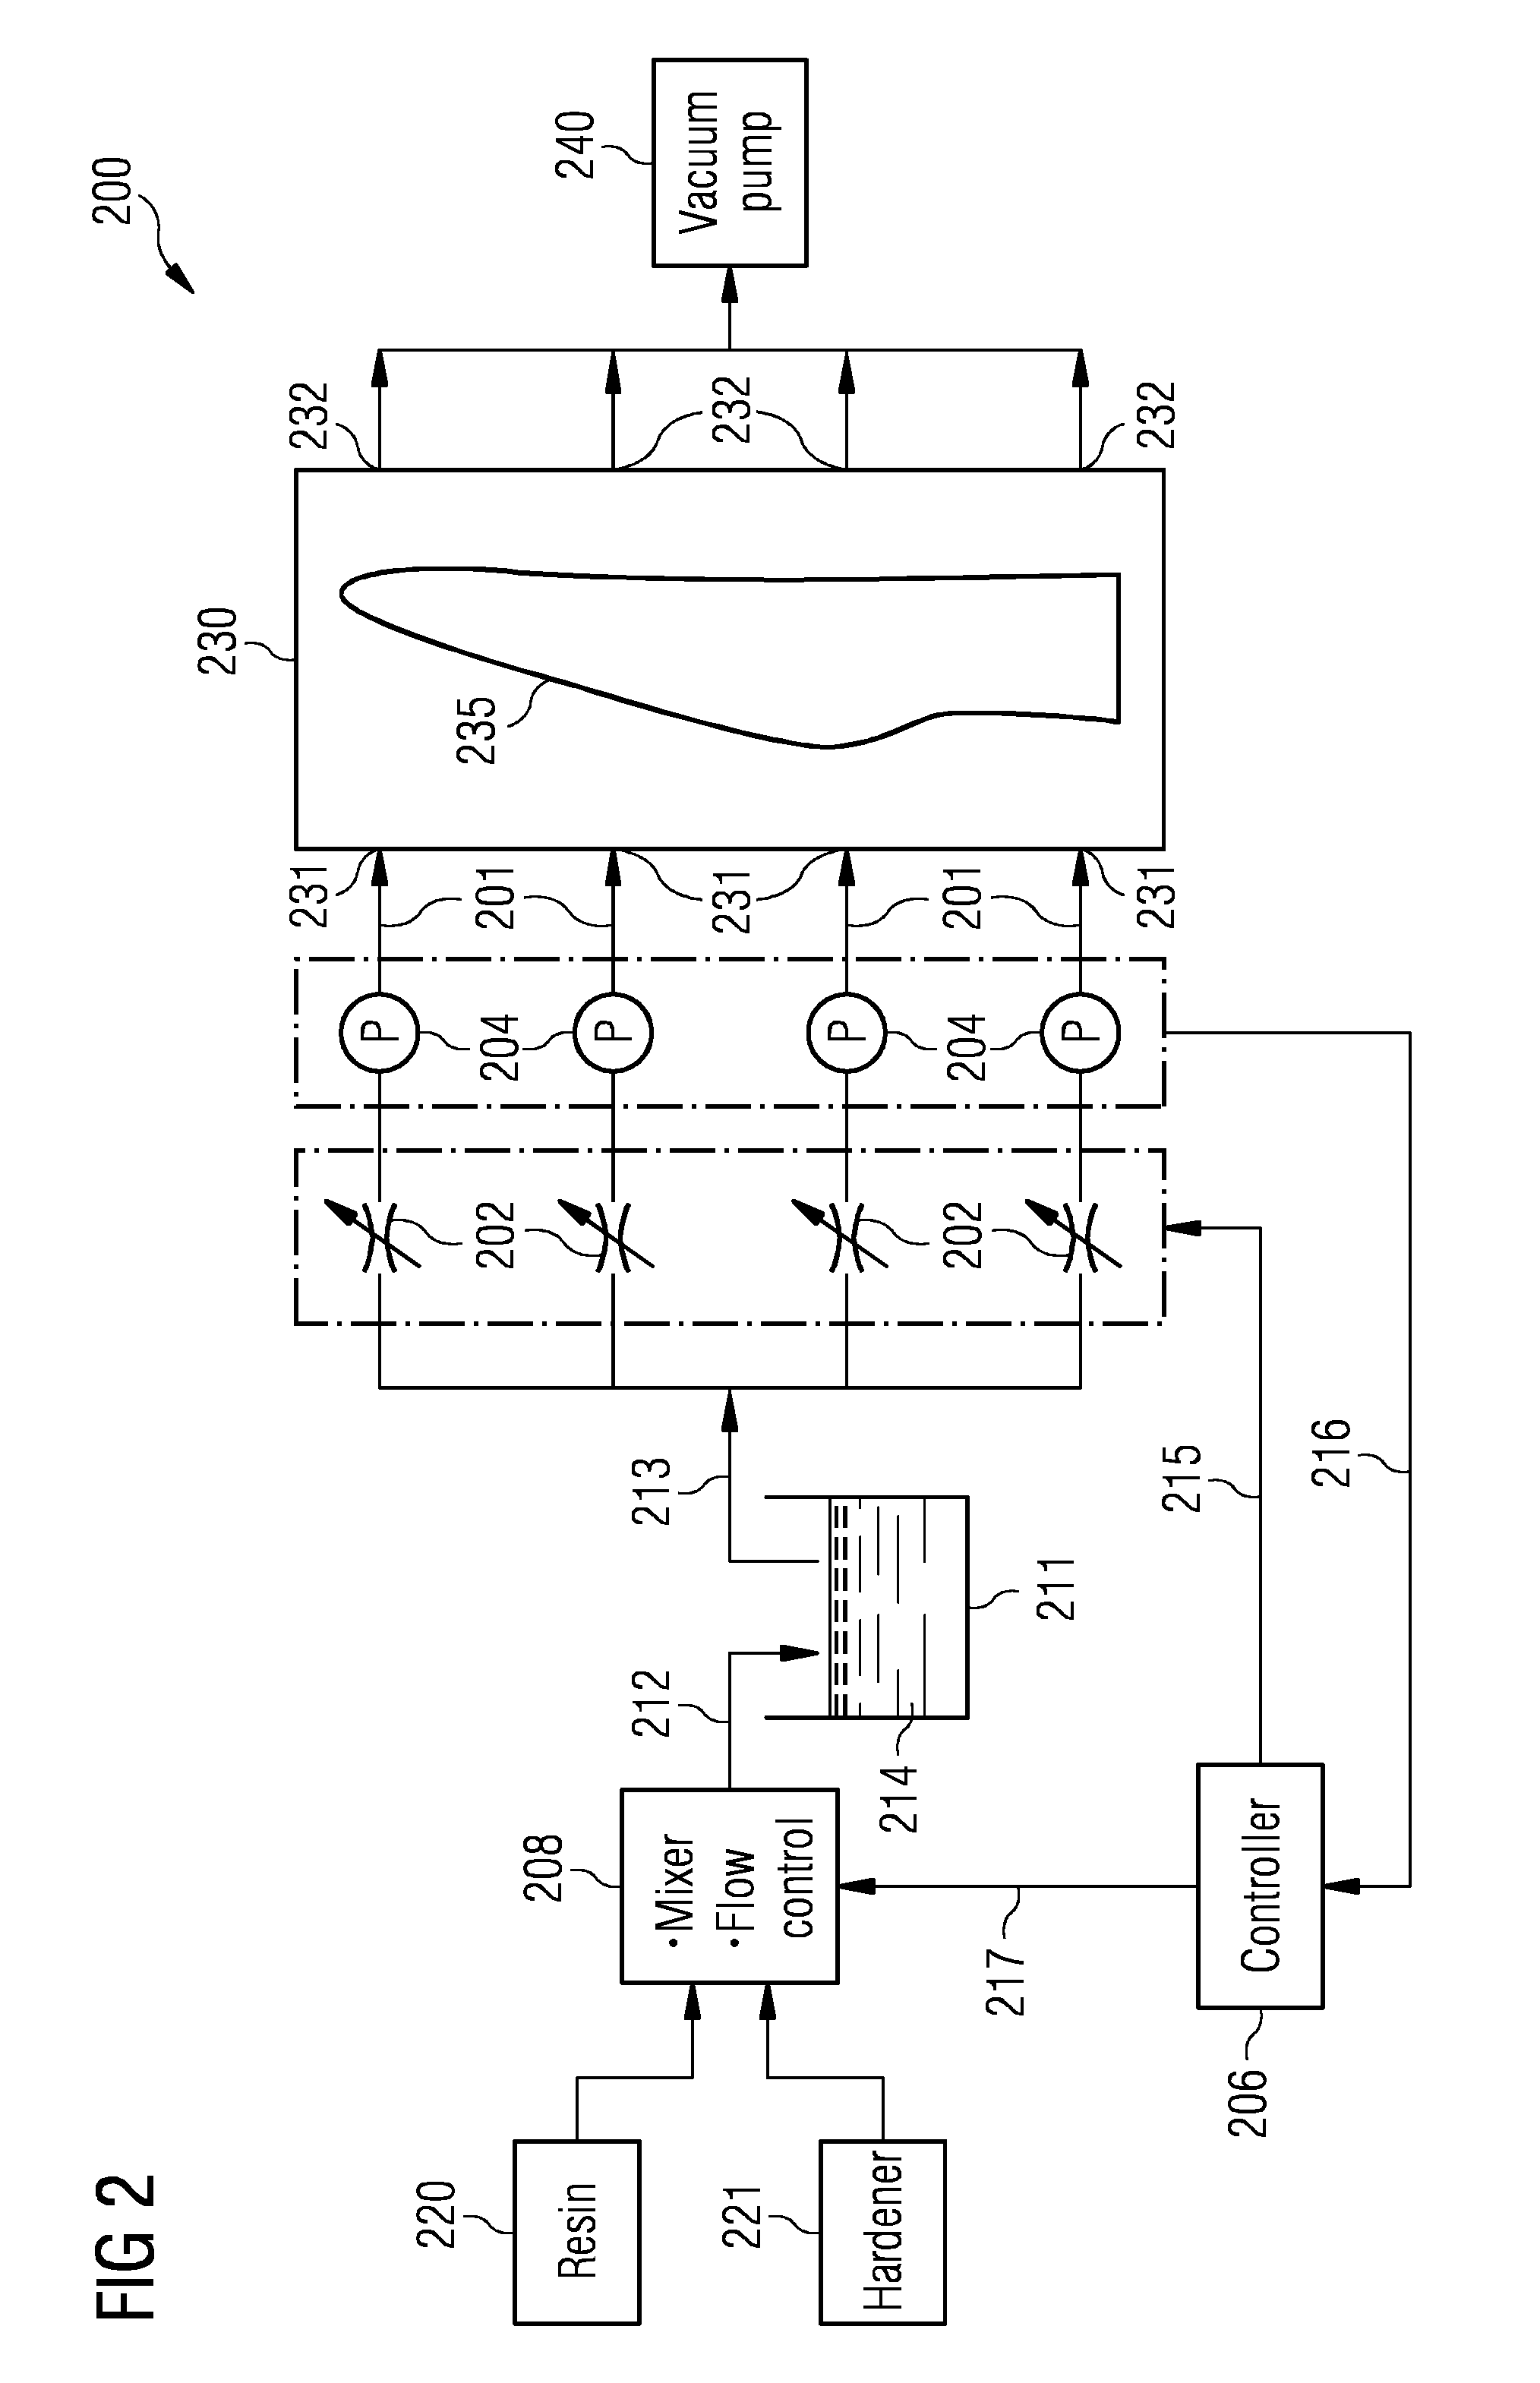 System and method for feeding a fluid to a mold for molding a reinforced composite structure